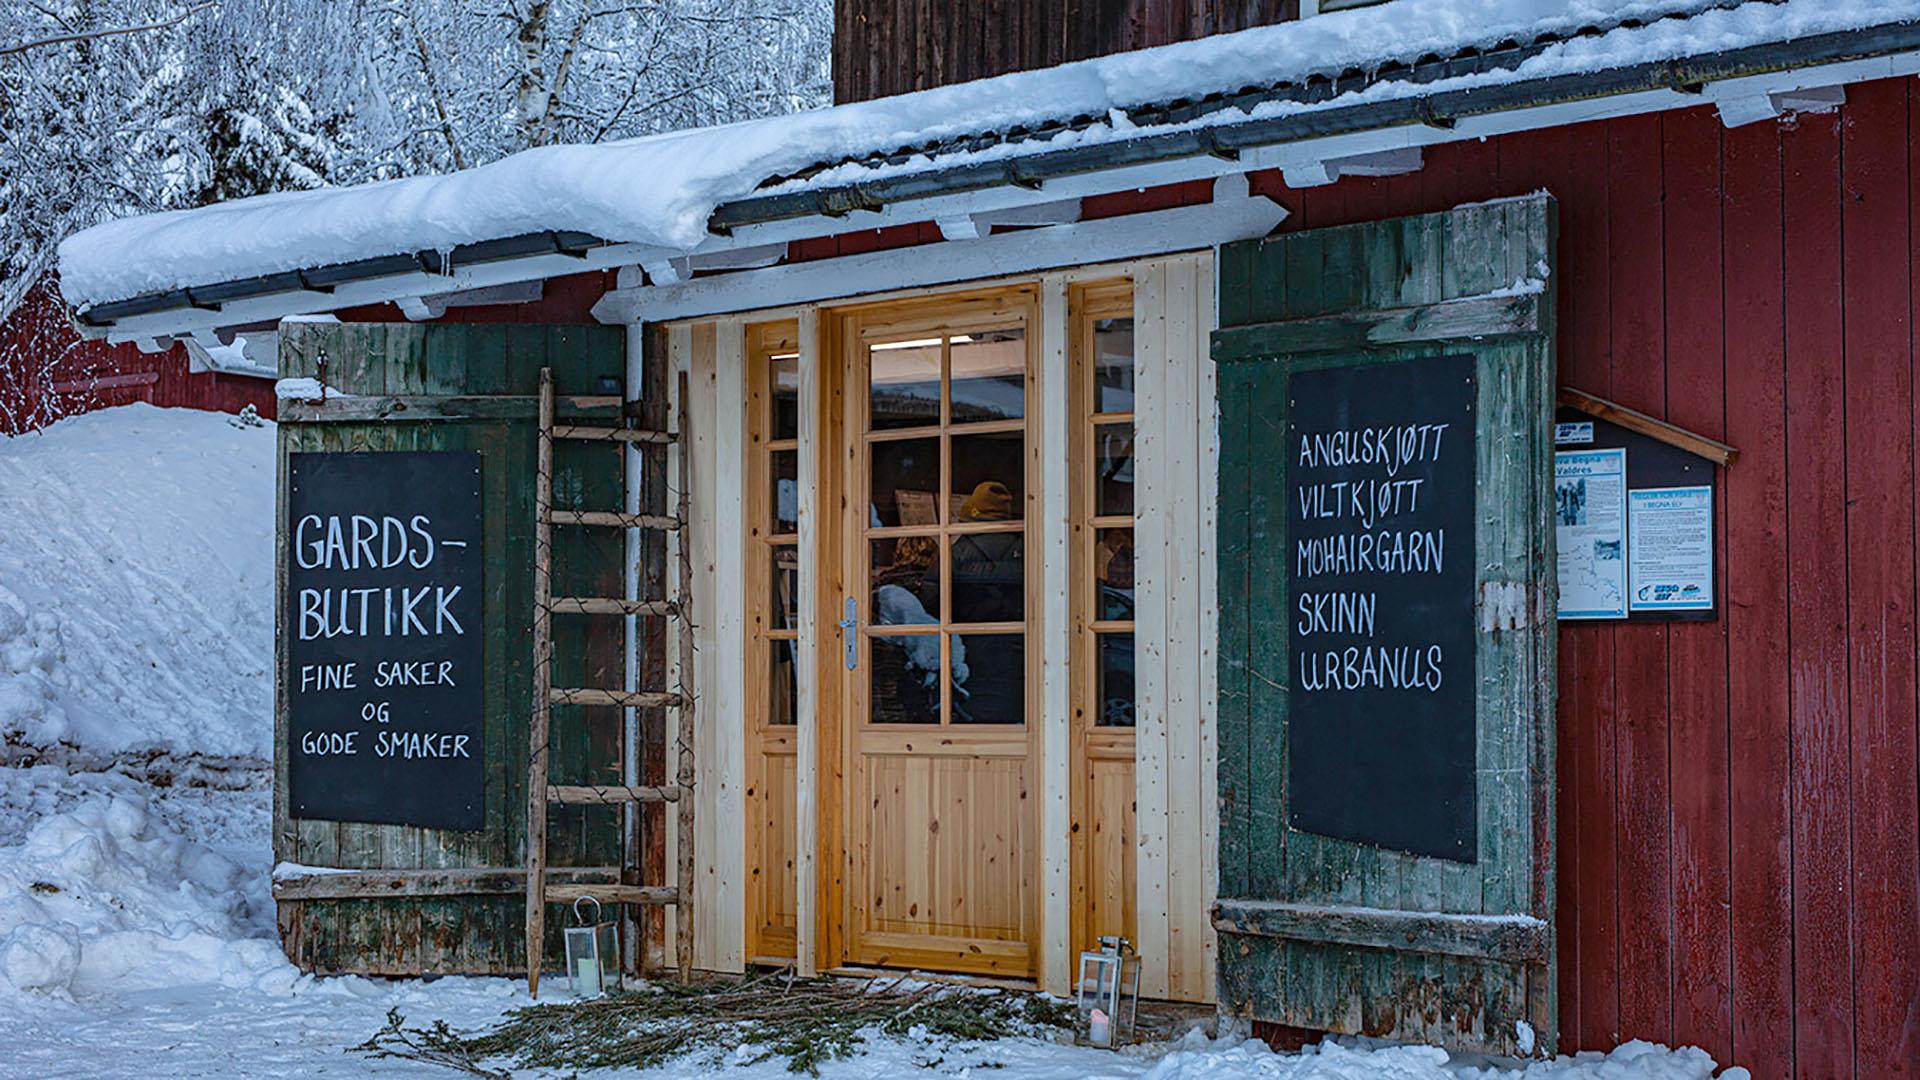 The entrance to a farm store in winter.